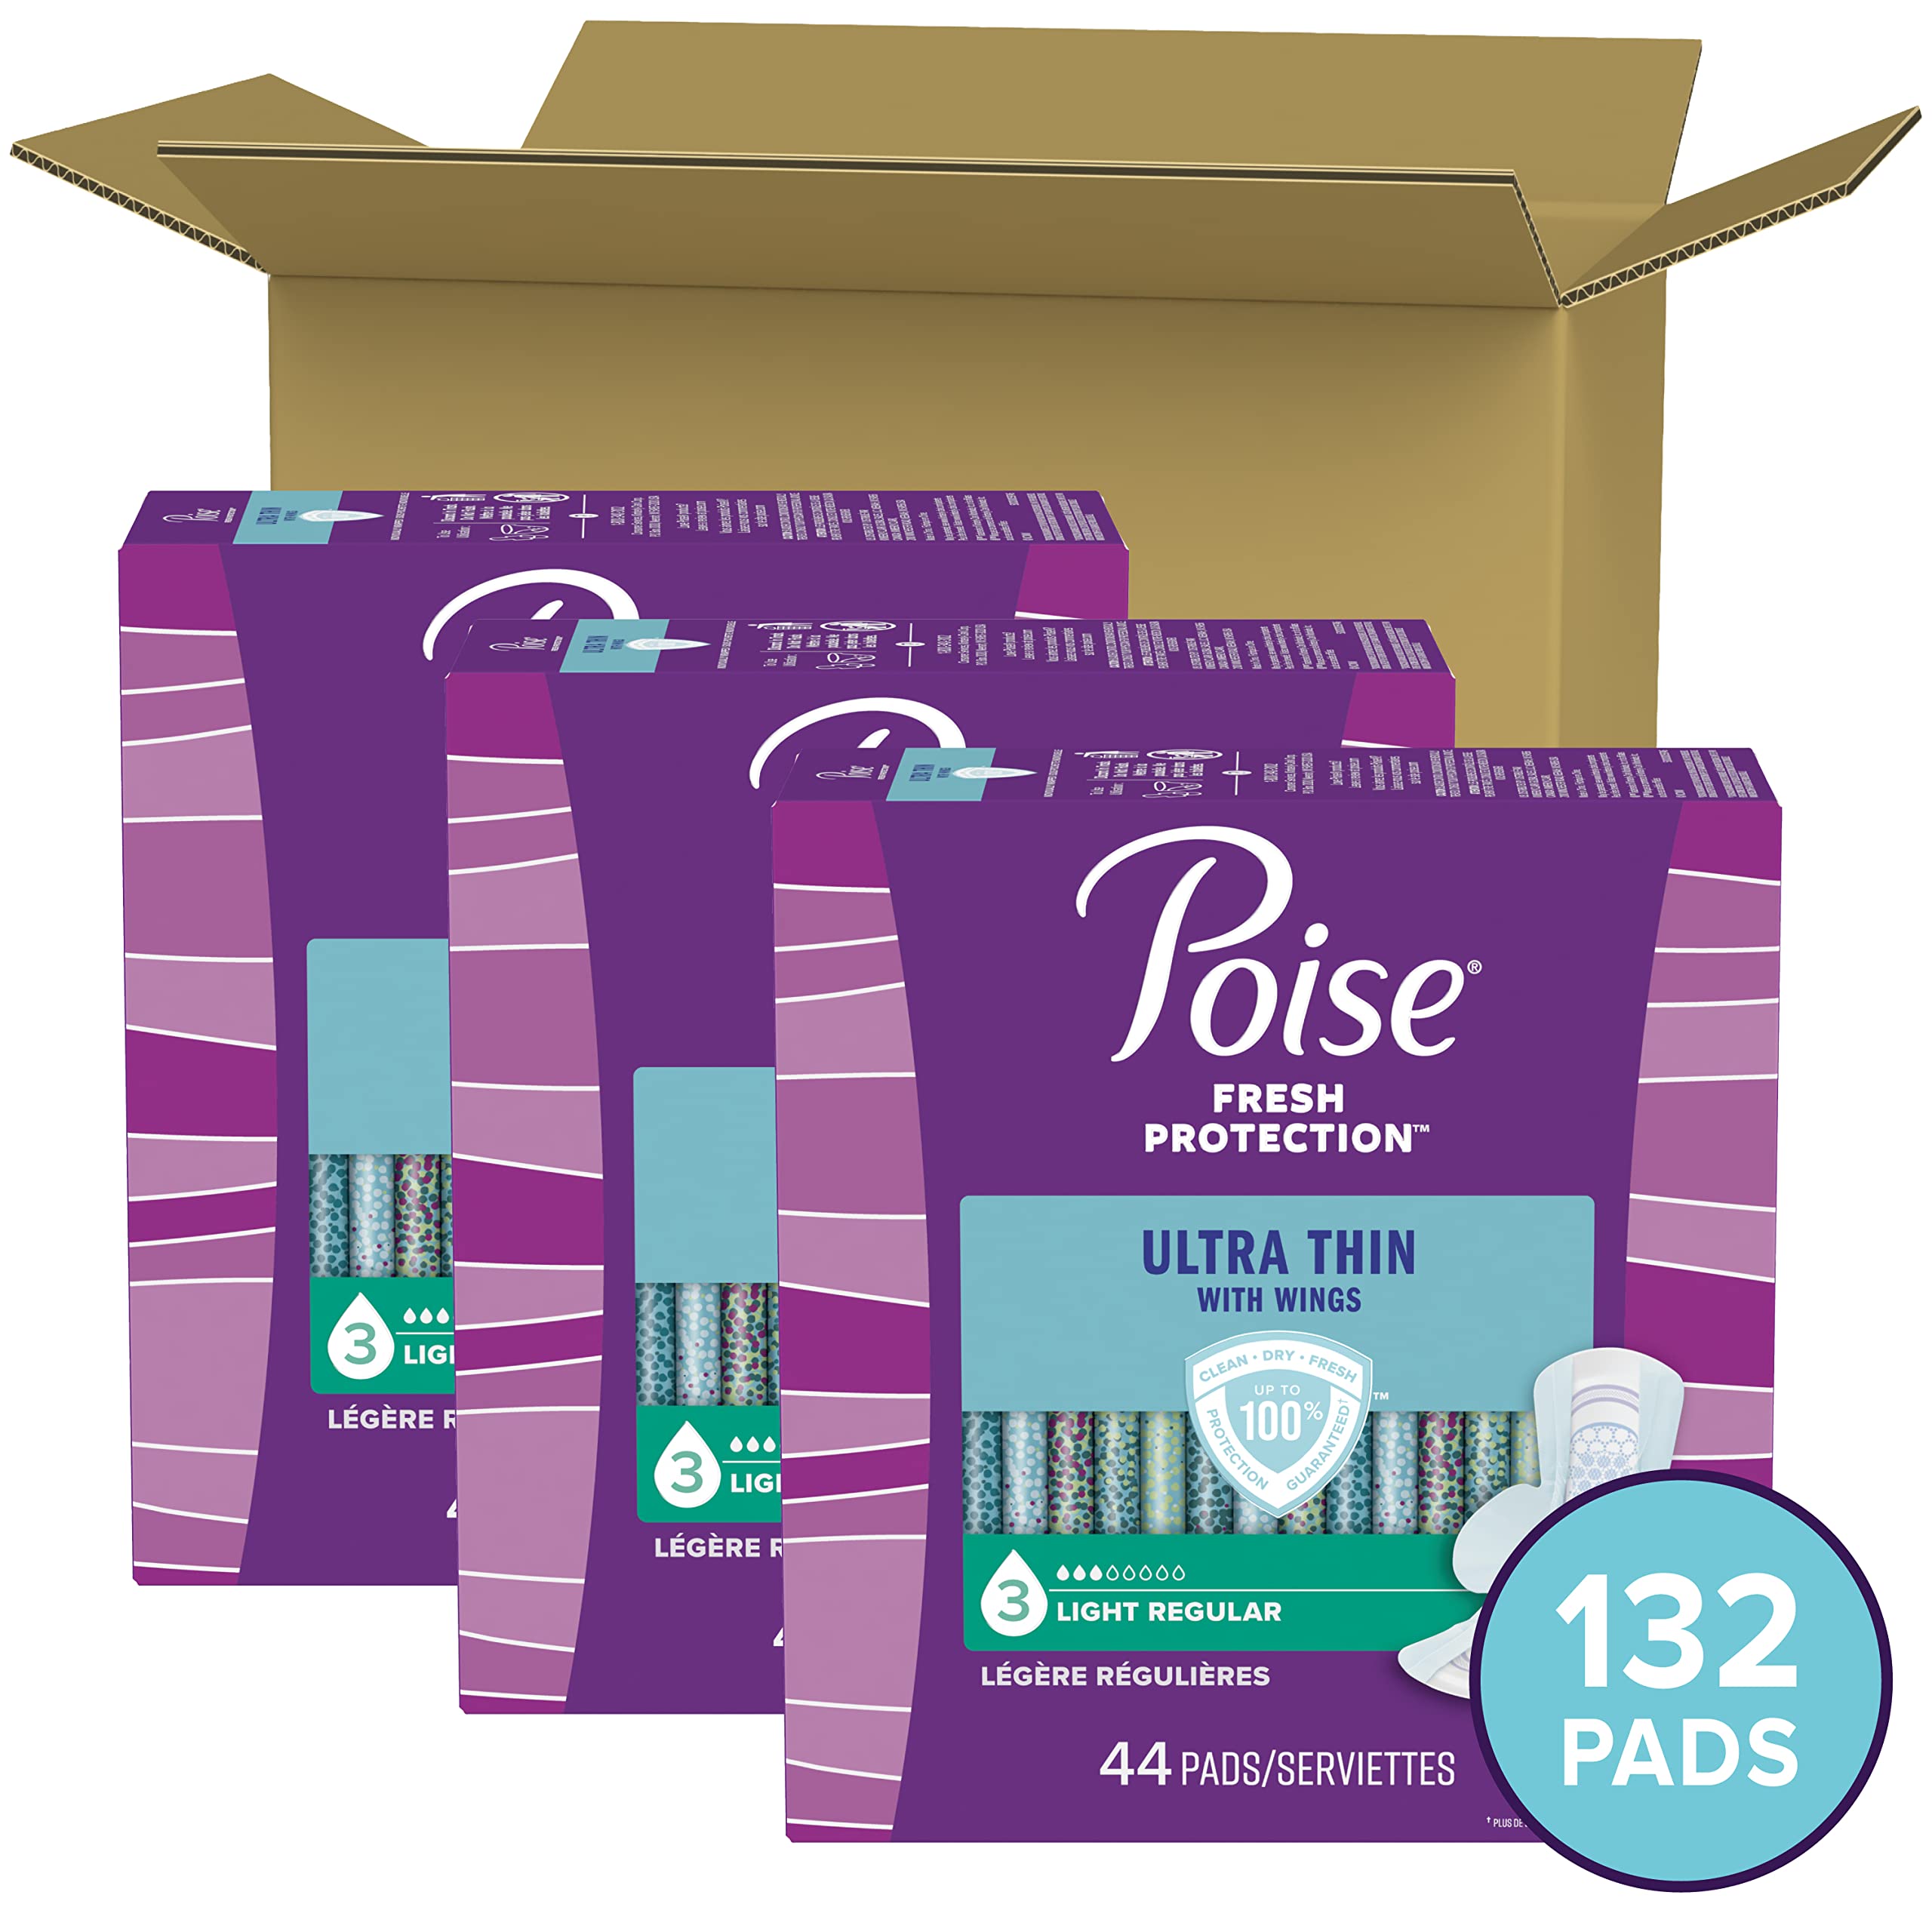 Poise Ultra Thin Incontinence Pads with Wings & Postpartum Incontinence Pads, 3 Drop Light Absorbency, Regular Length, 132 Count, Packaging May Vary